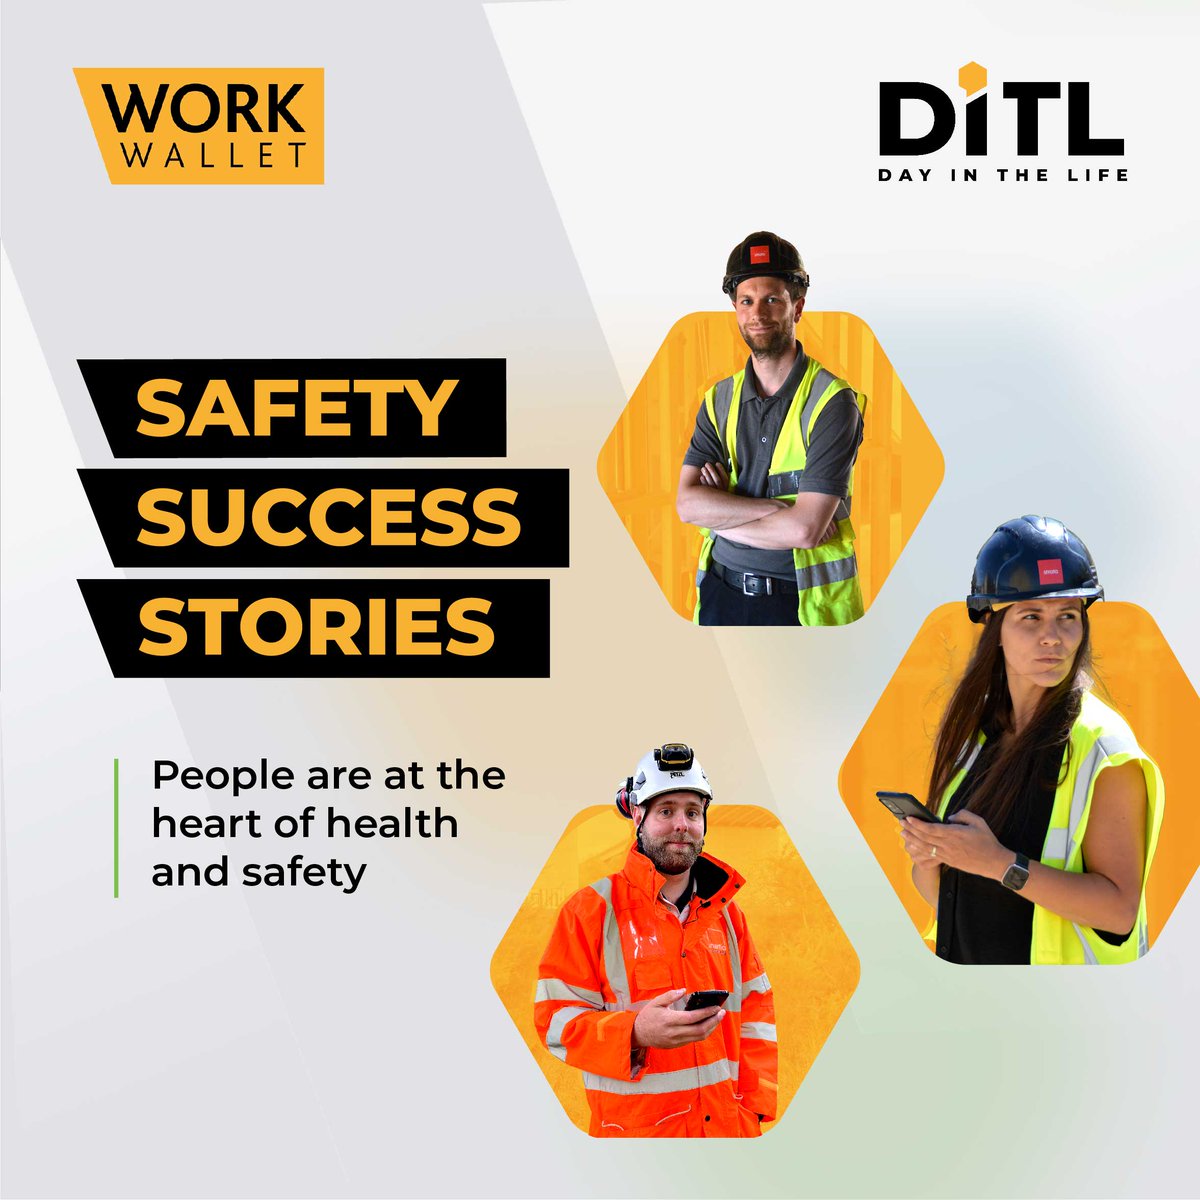 𝗔 𝗗𝗔𝗬 𝗜𝗡 𝗧𝗛𝗘 𝗟𝗜𝗙𝗘 𝗢𝗙 𝗦𝗔𝗙𝗘𝗧𝗬 𝗢𝗡 𝗦𝗜𝗧𝗘. See how real people are using safety software successfully. The first in our series is from a construction business. Here are their #safety success stories hubs.la/Q01NhZlK0